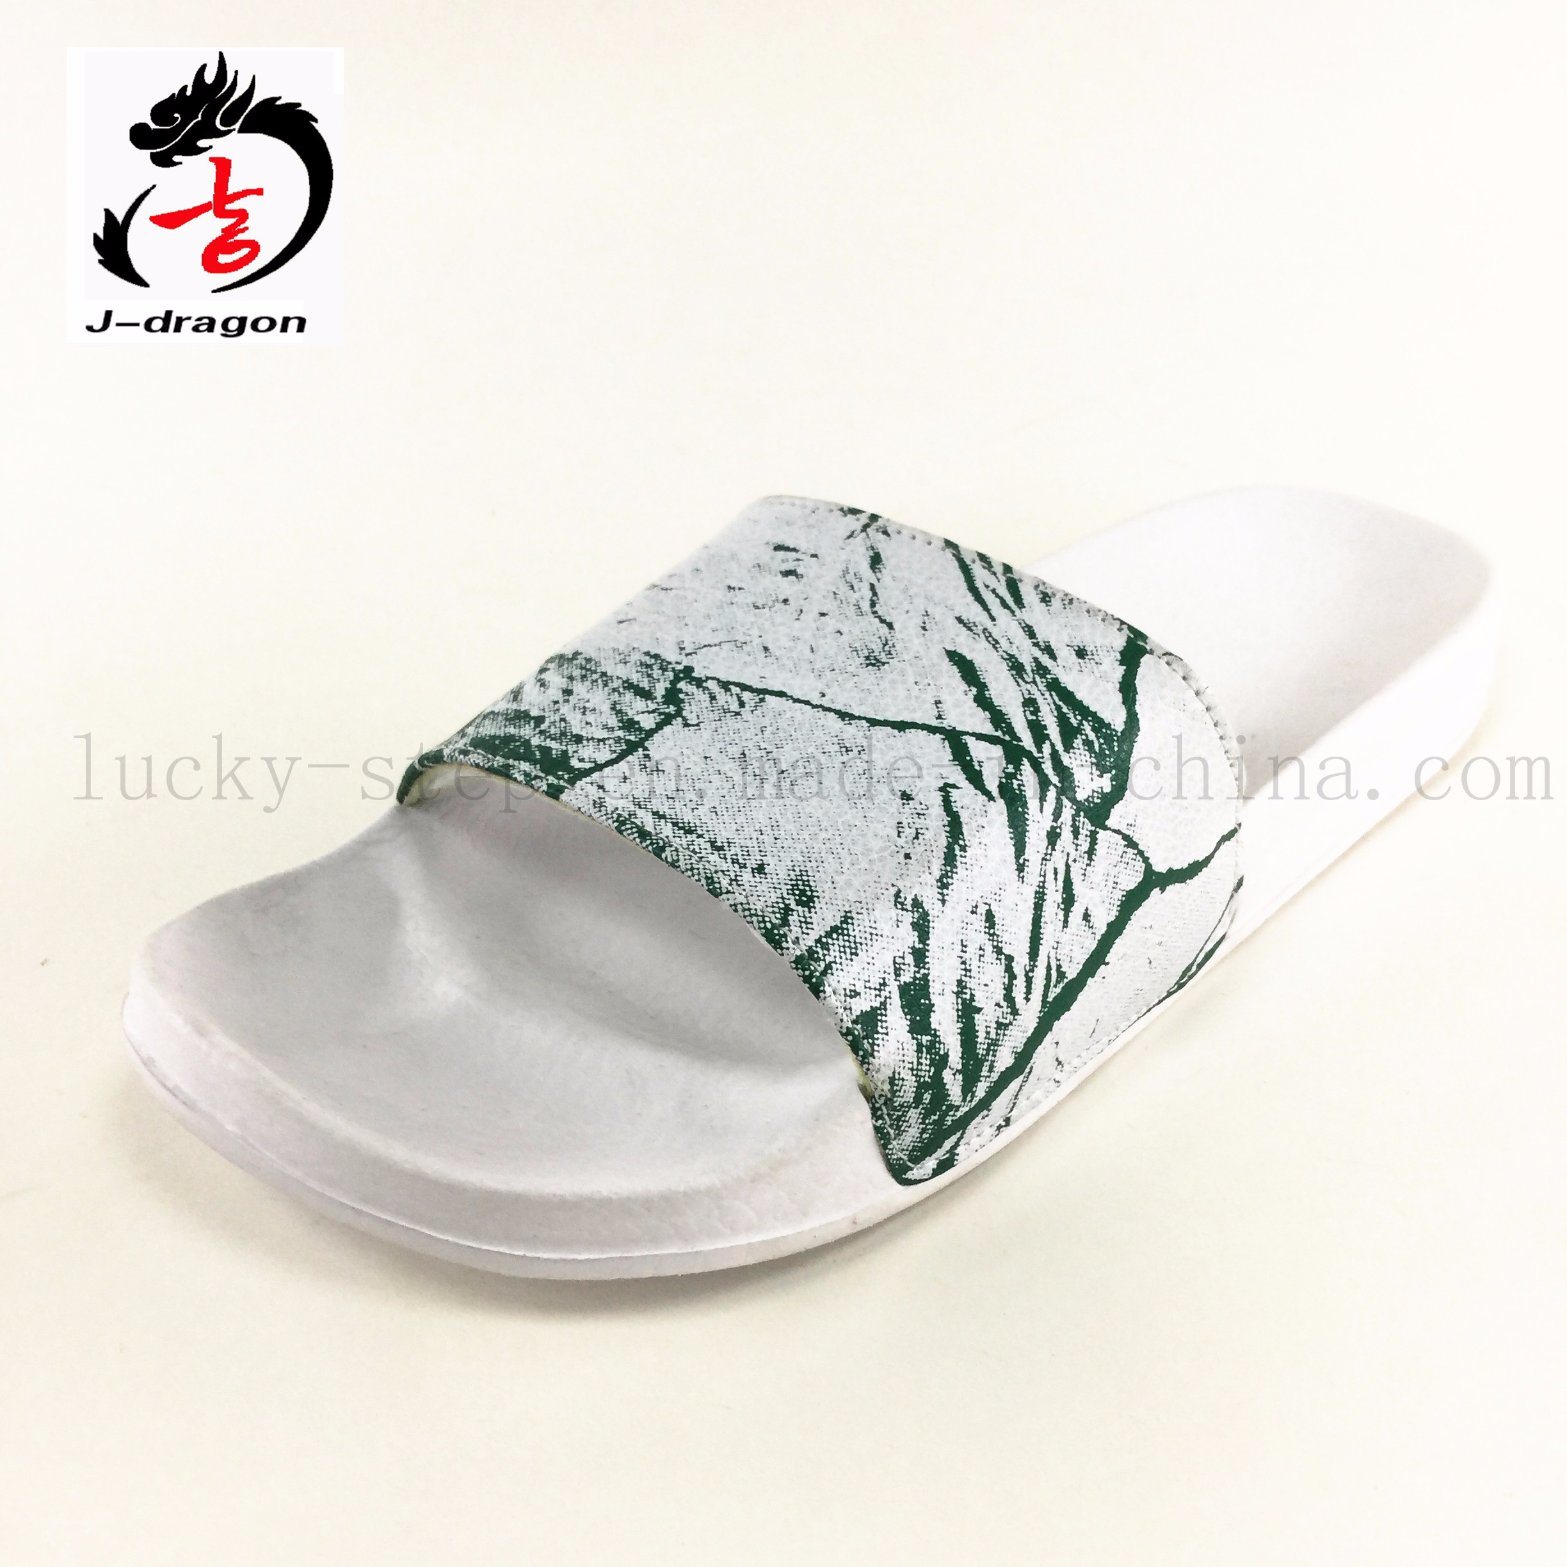 PVC Soft and Light Slipper Casual Shoes